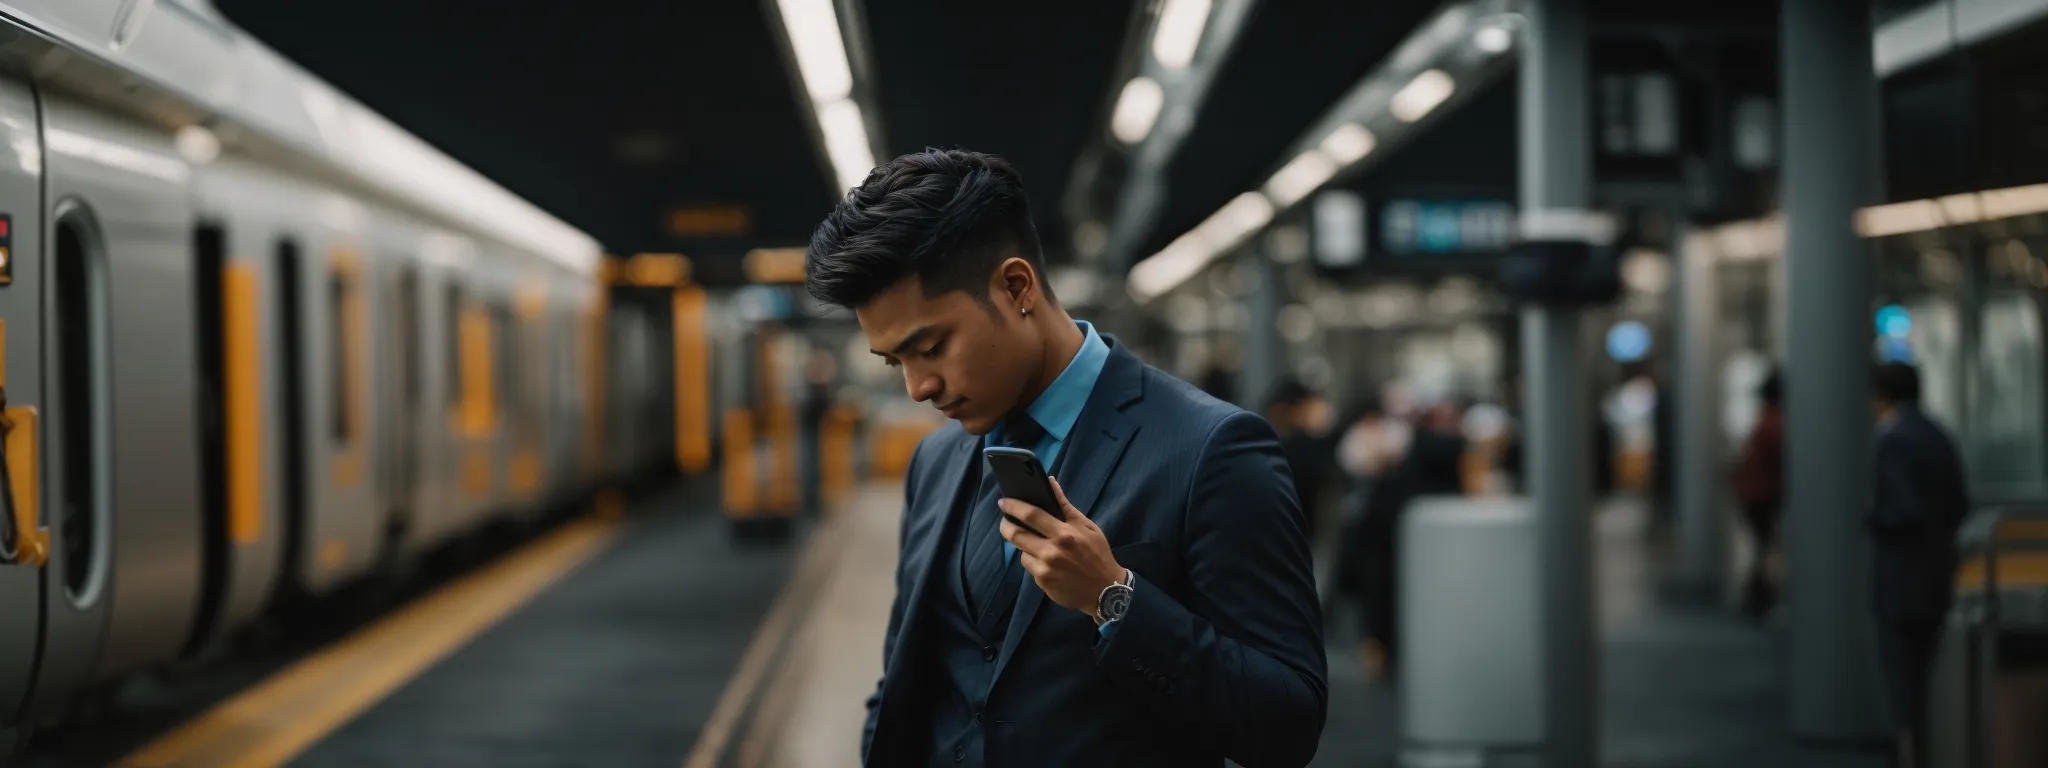 a business professional using a smartphone to update contact information while in transit.